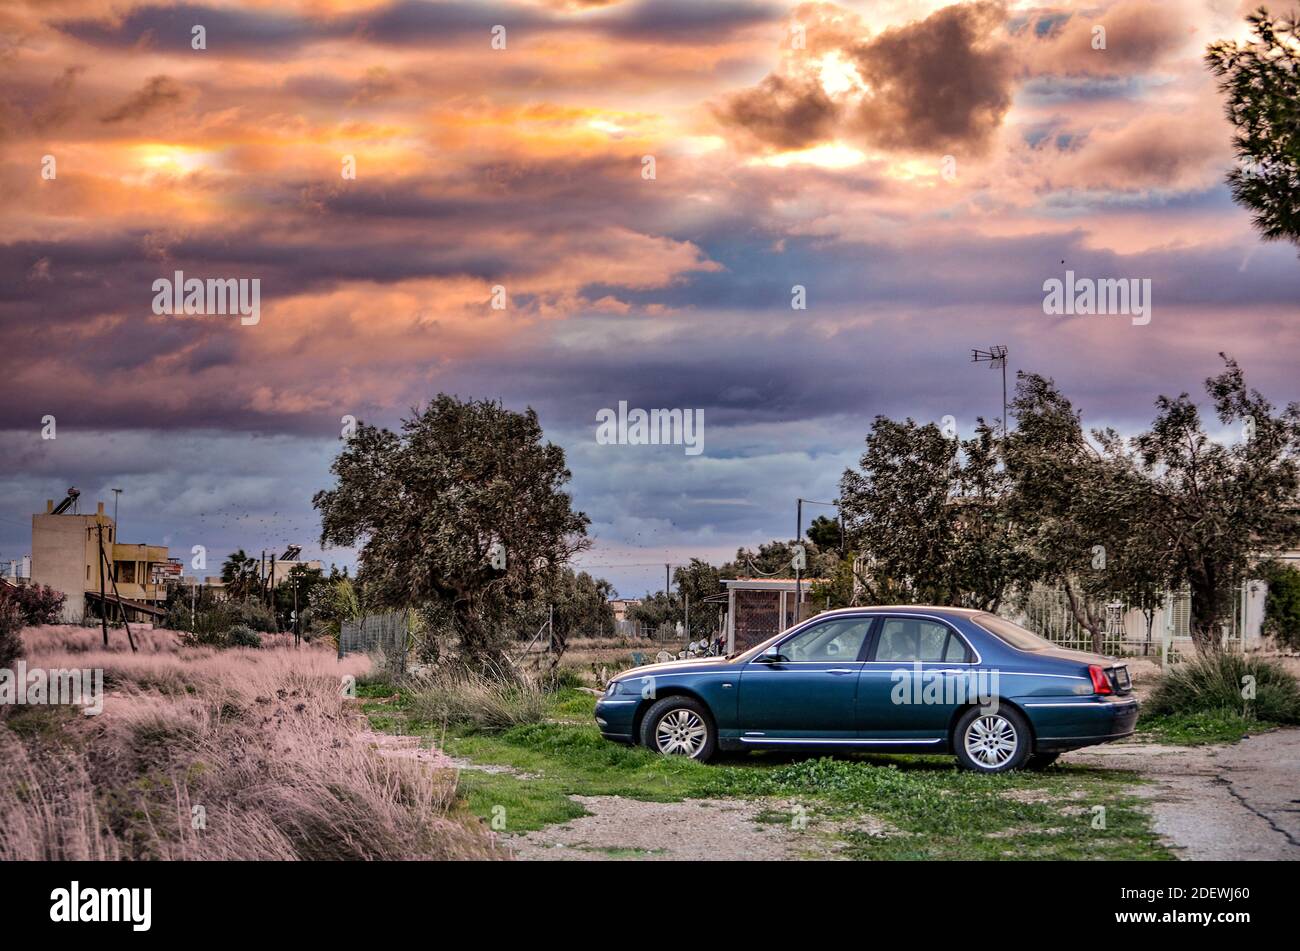 A beautiful blue car from 90's under a dramatic sky at sunset Stock Photo